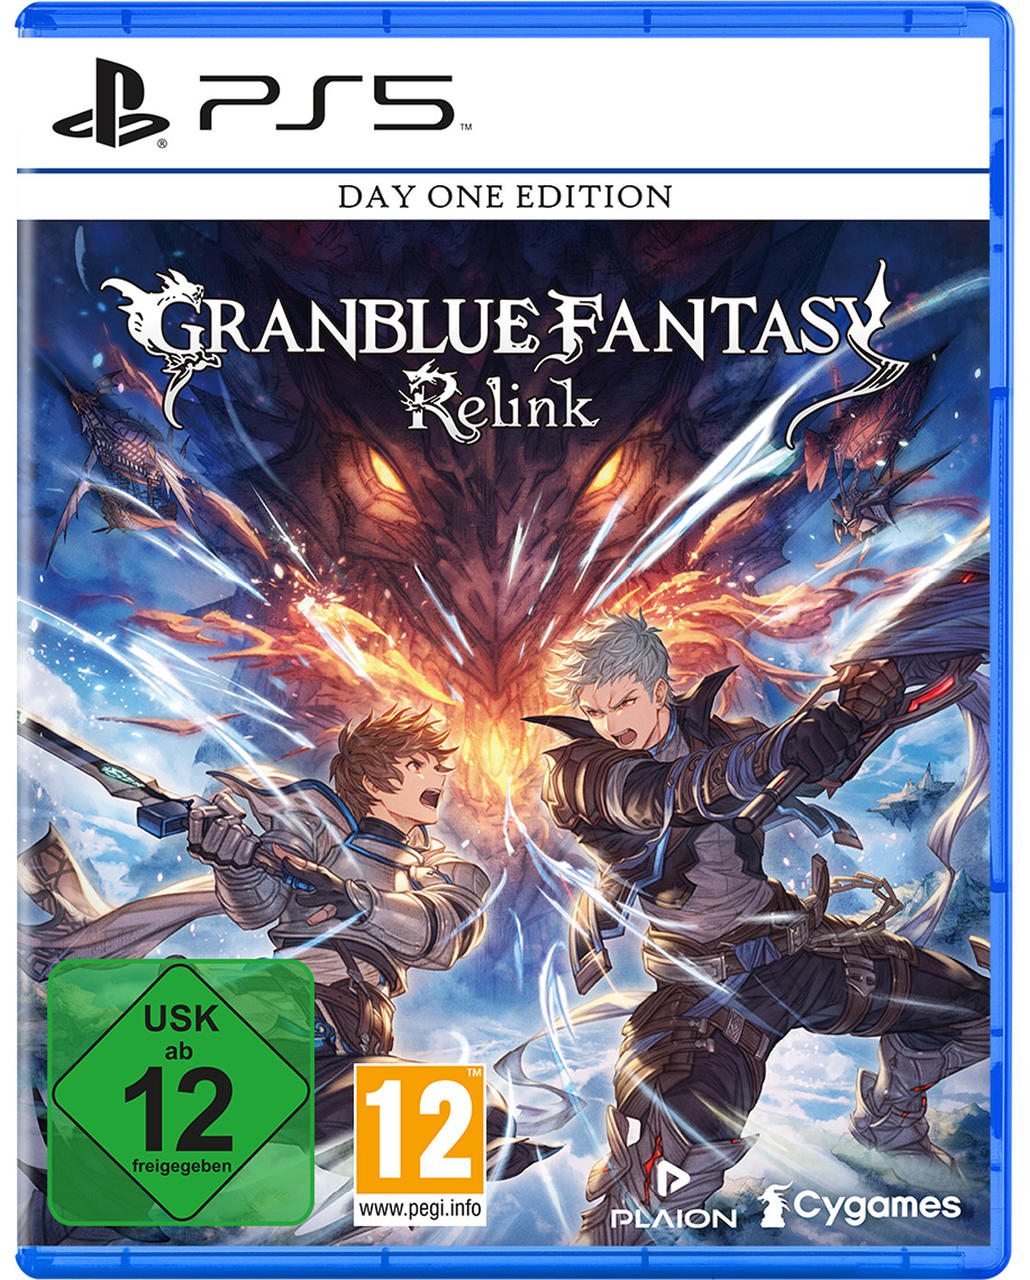 Fantasy - Edition Day One 5] Relink Granblue [PlayStation